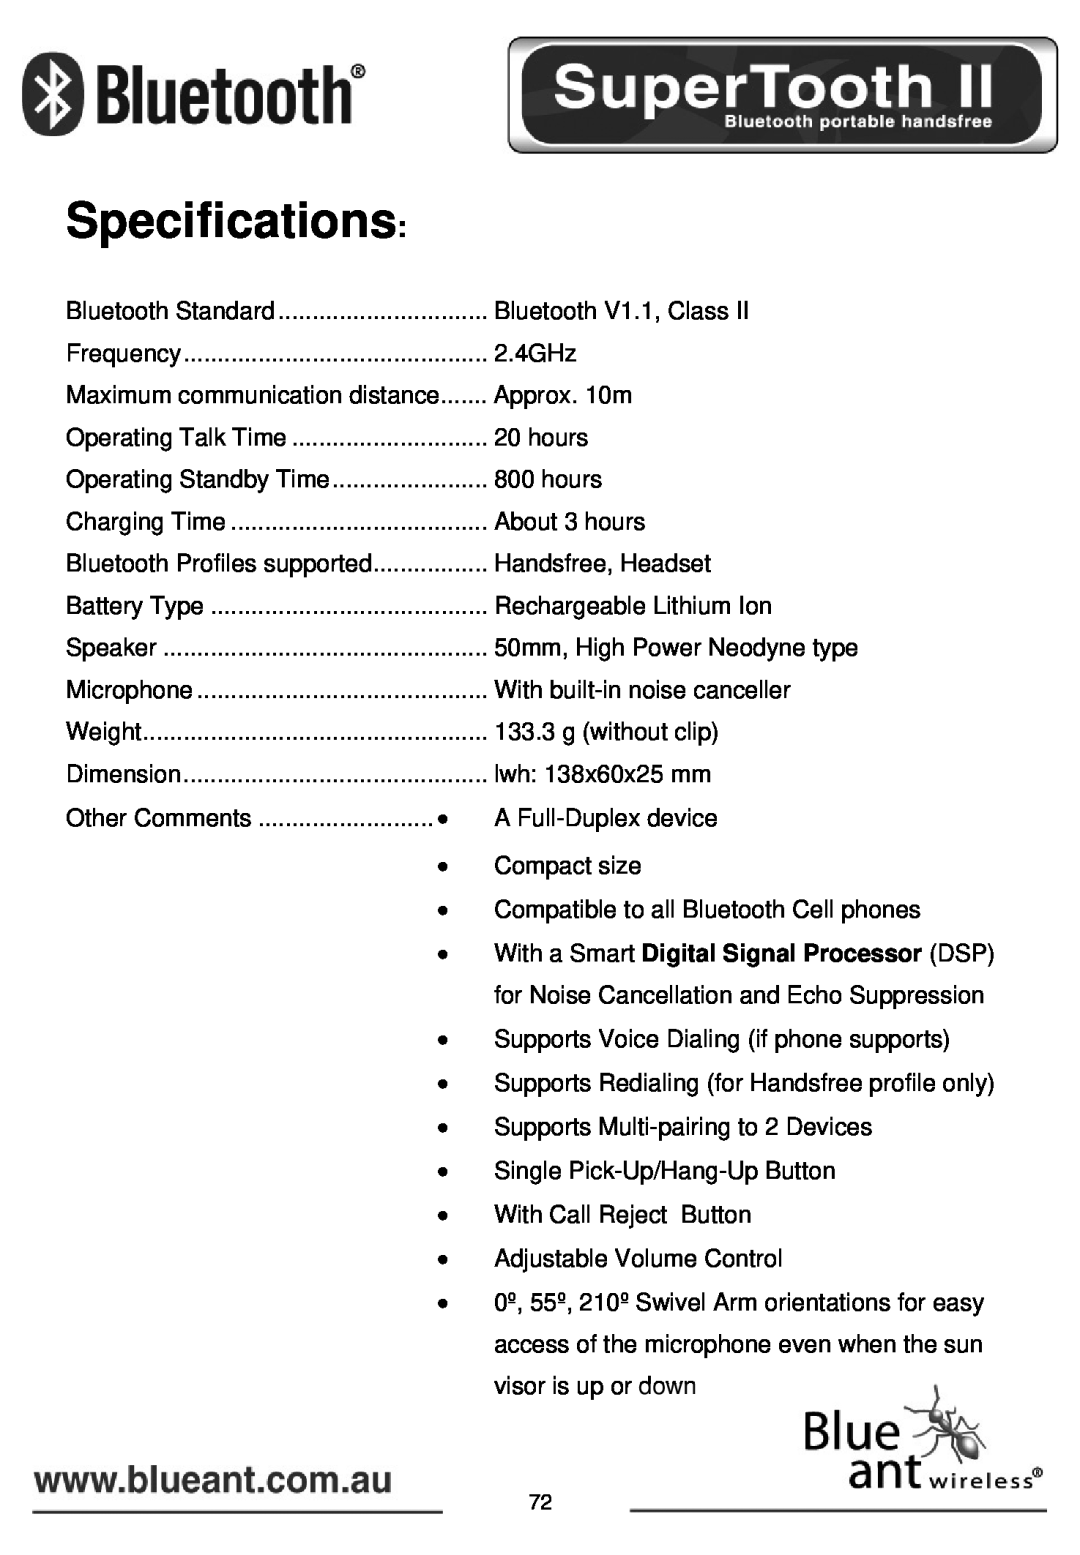 BlueAnt Wireless SUPERTOOTH II manual Specifications 